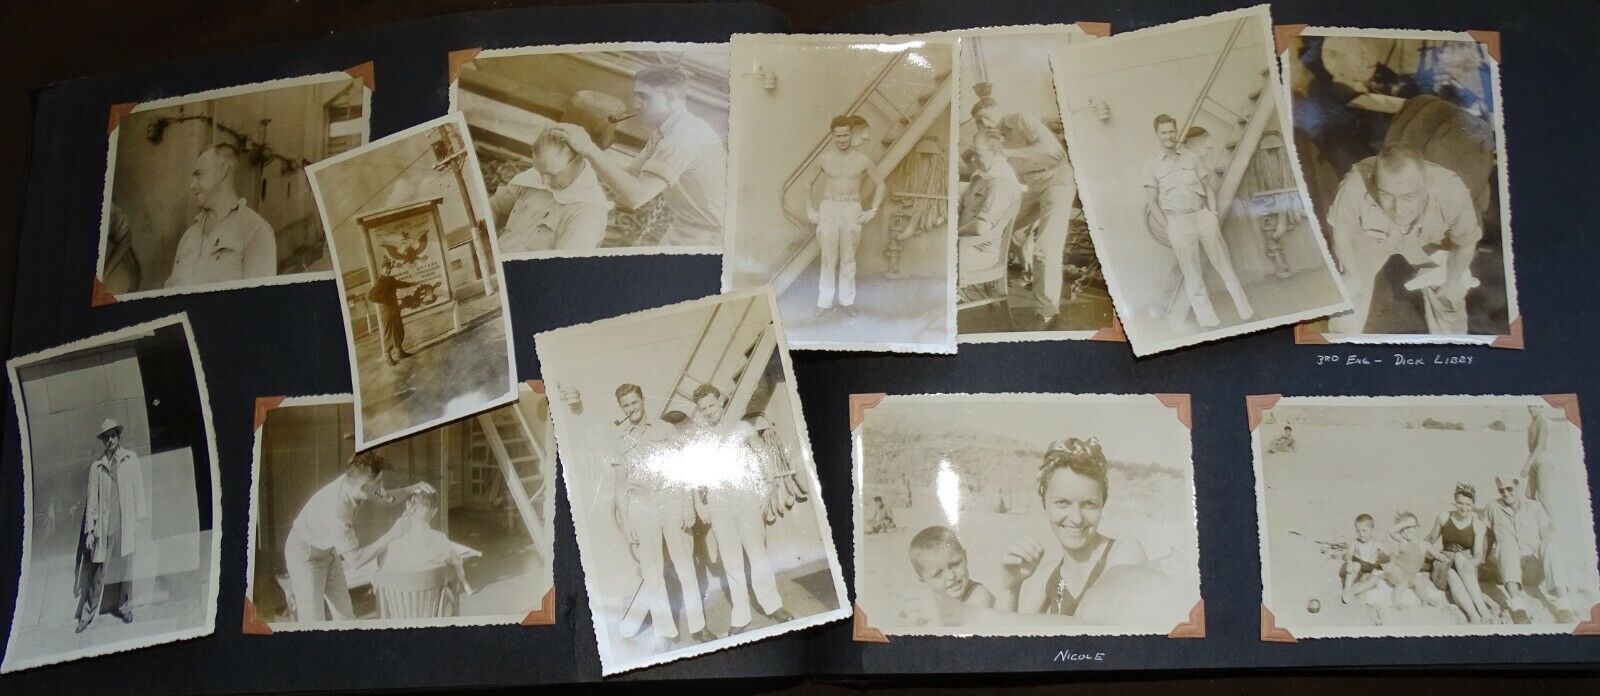 69 Original 1943 Photographs from G.I. - Naples,North Africa,Arab Characters,etc